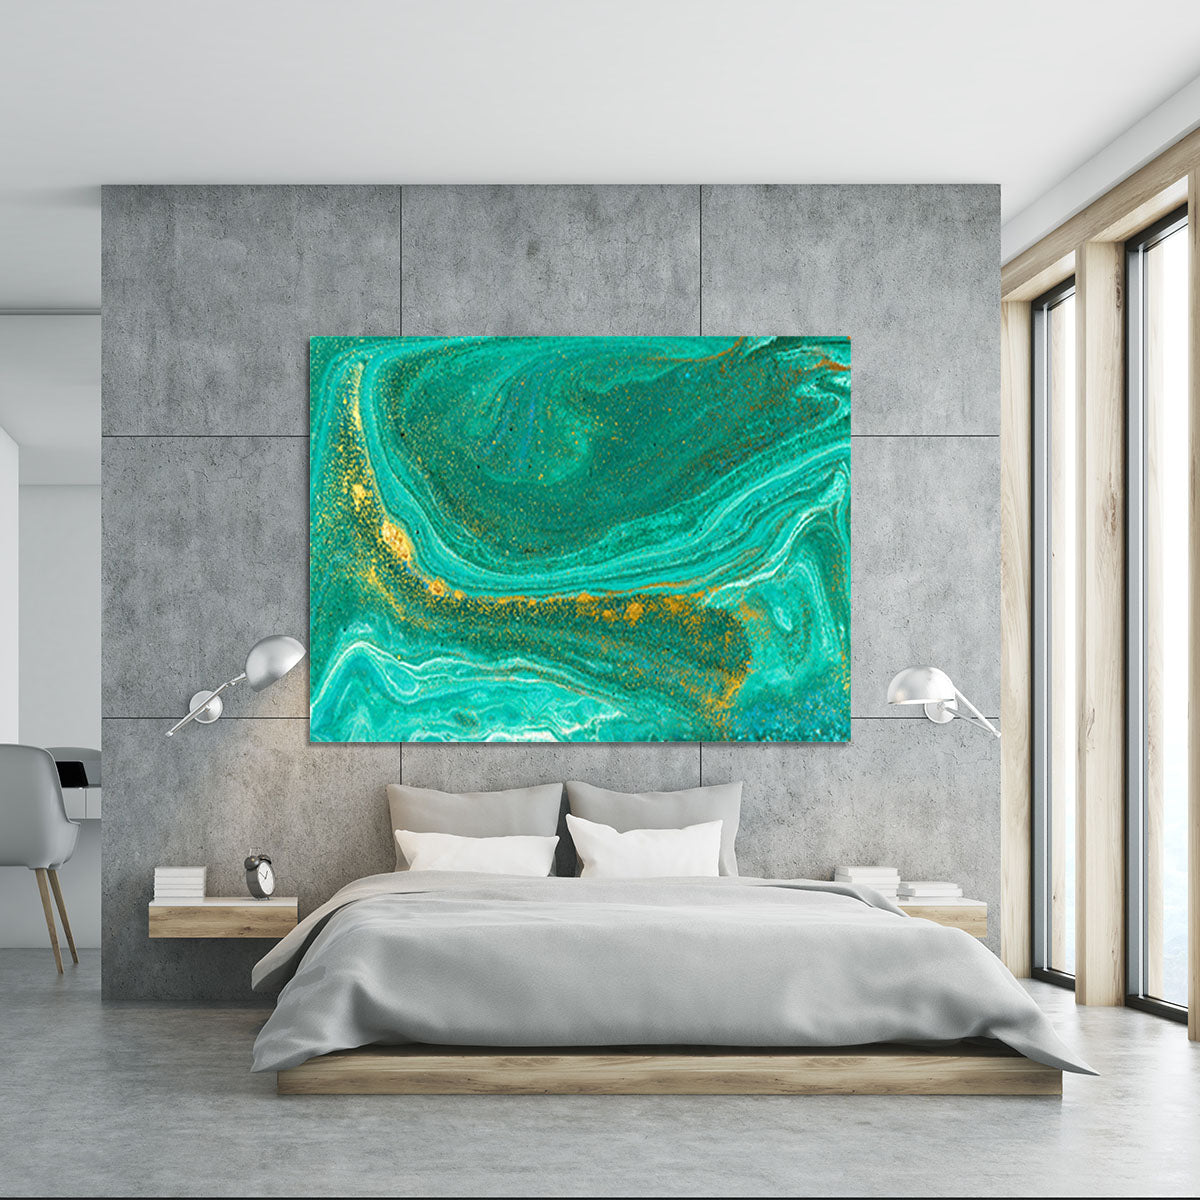 Green Swirled Marble Canvas Print or Poster - Canvas Art Rocks - 5